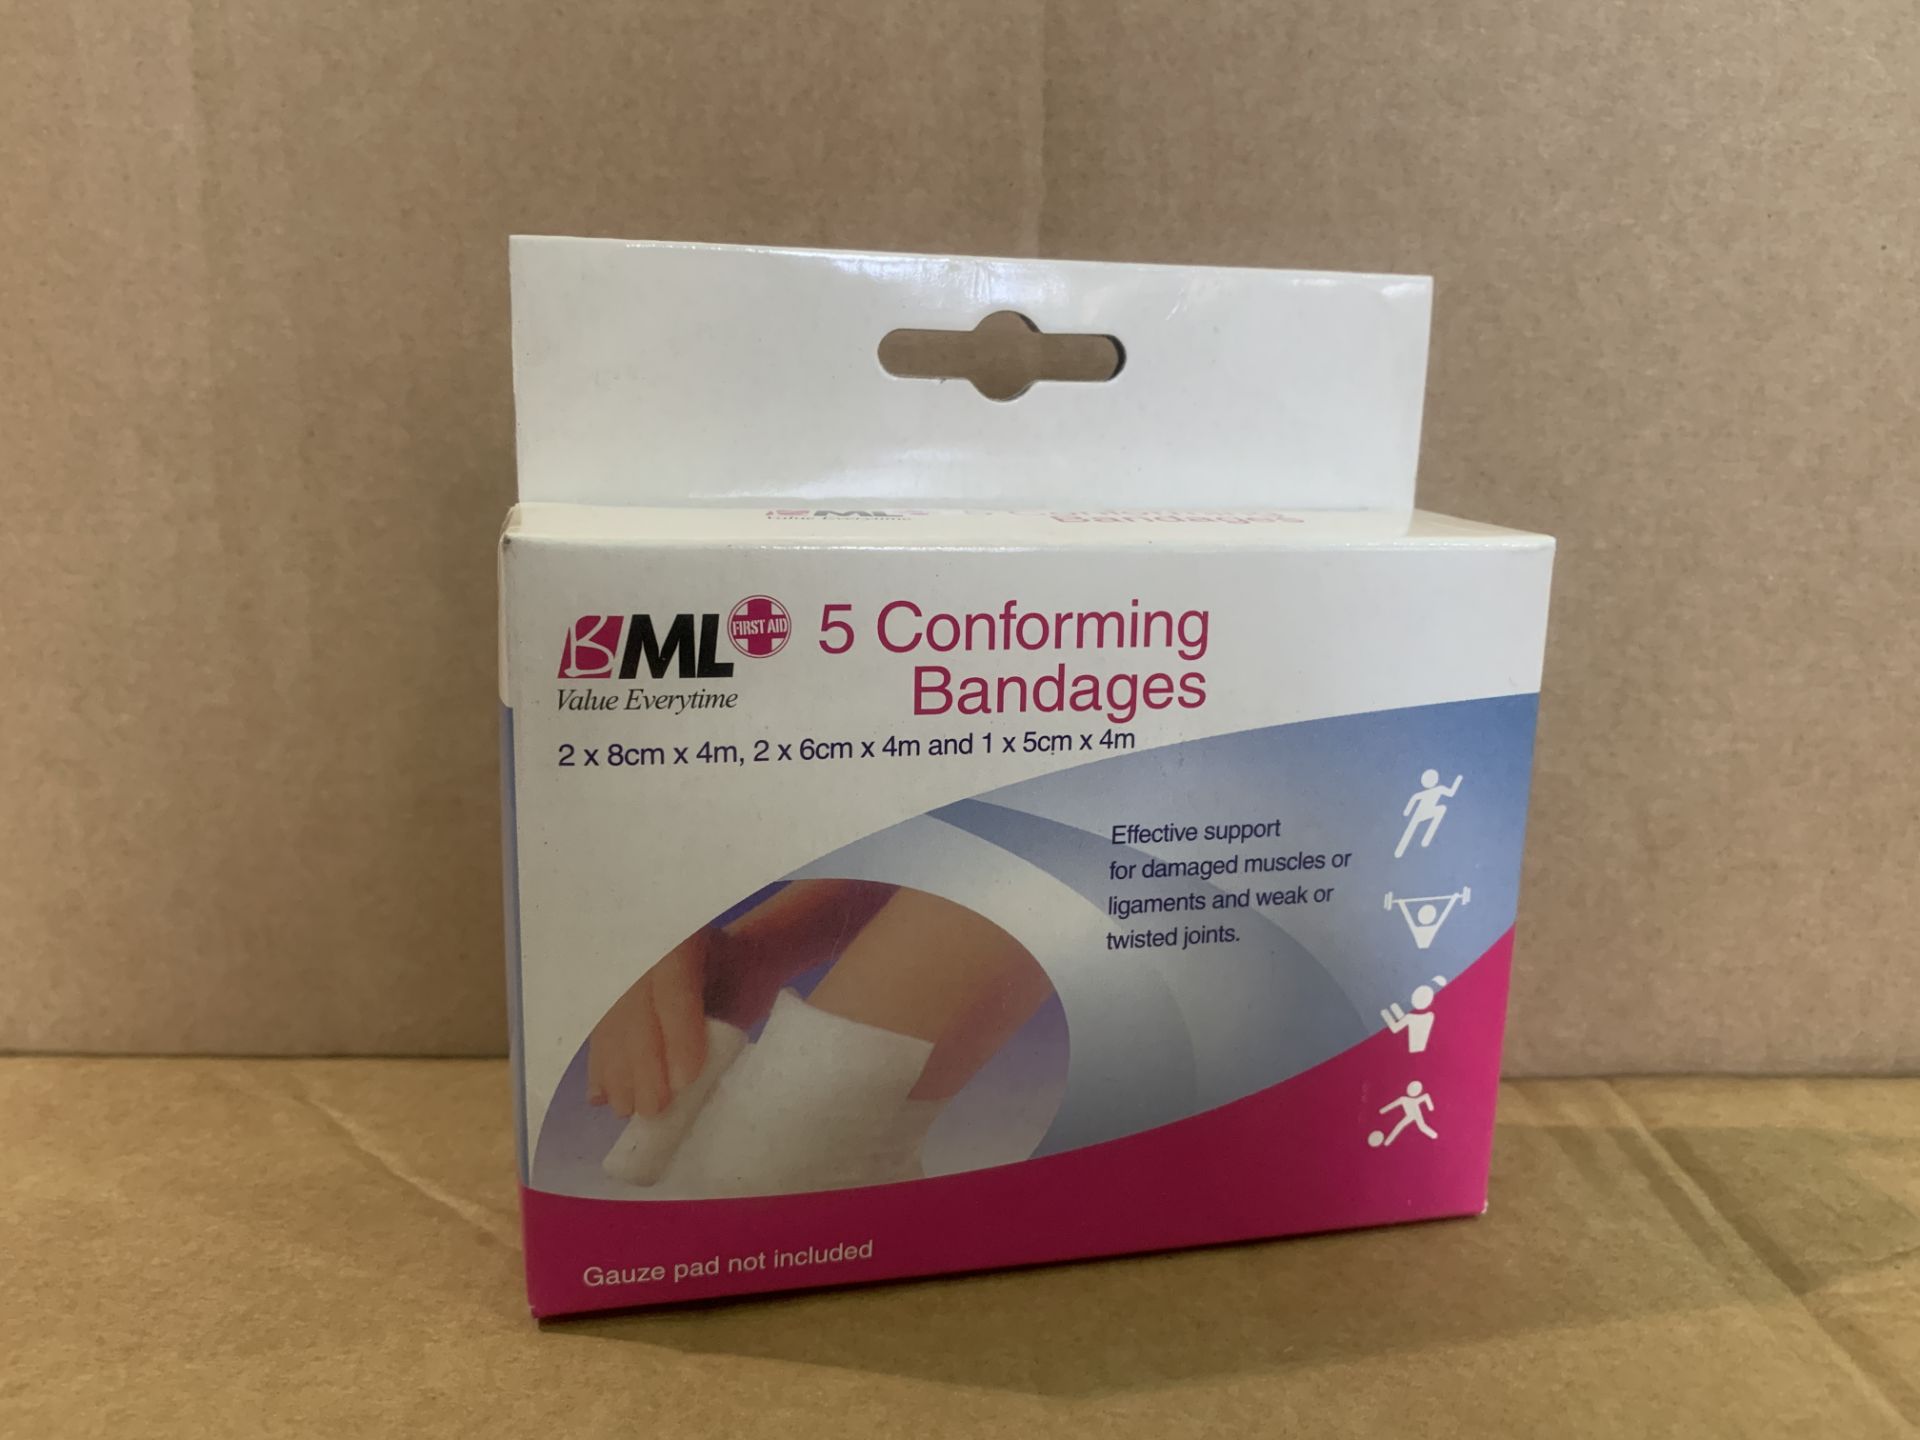 192 X BRAND NEW BML PACKS OF 5 CONFORMING BANDAGES R15